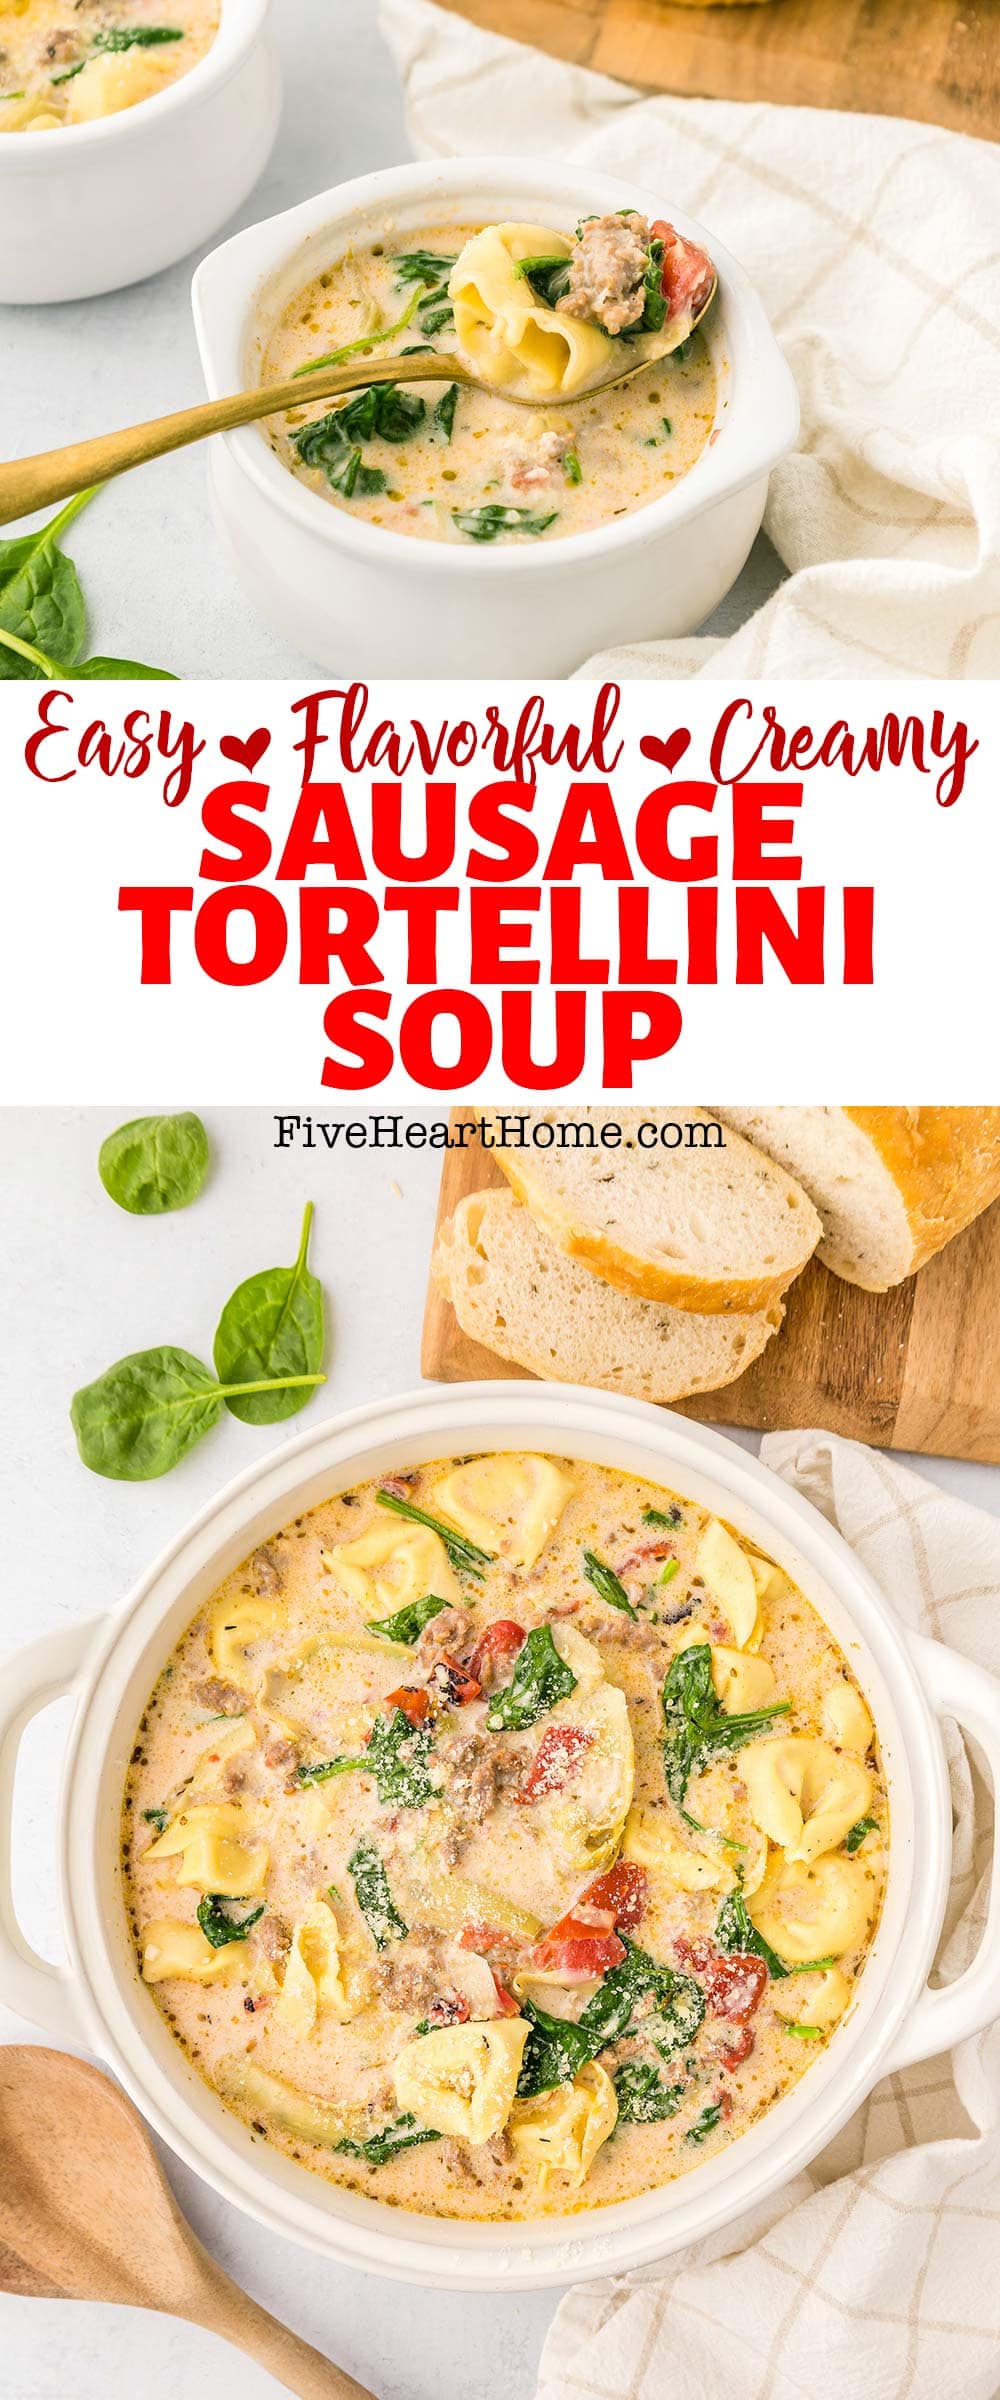 Sausage Tortellini Soup ~ this hearty, comforting soup recipe is creamy and flavorful, loaded with Italian sausage, artichoke hearts, cheese tortellini, fresh baby spinach, and more, and it’s easy to make on the stove or in the crock pot! | FiveHeartHome.com via @fivehearthome